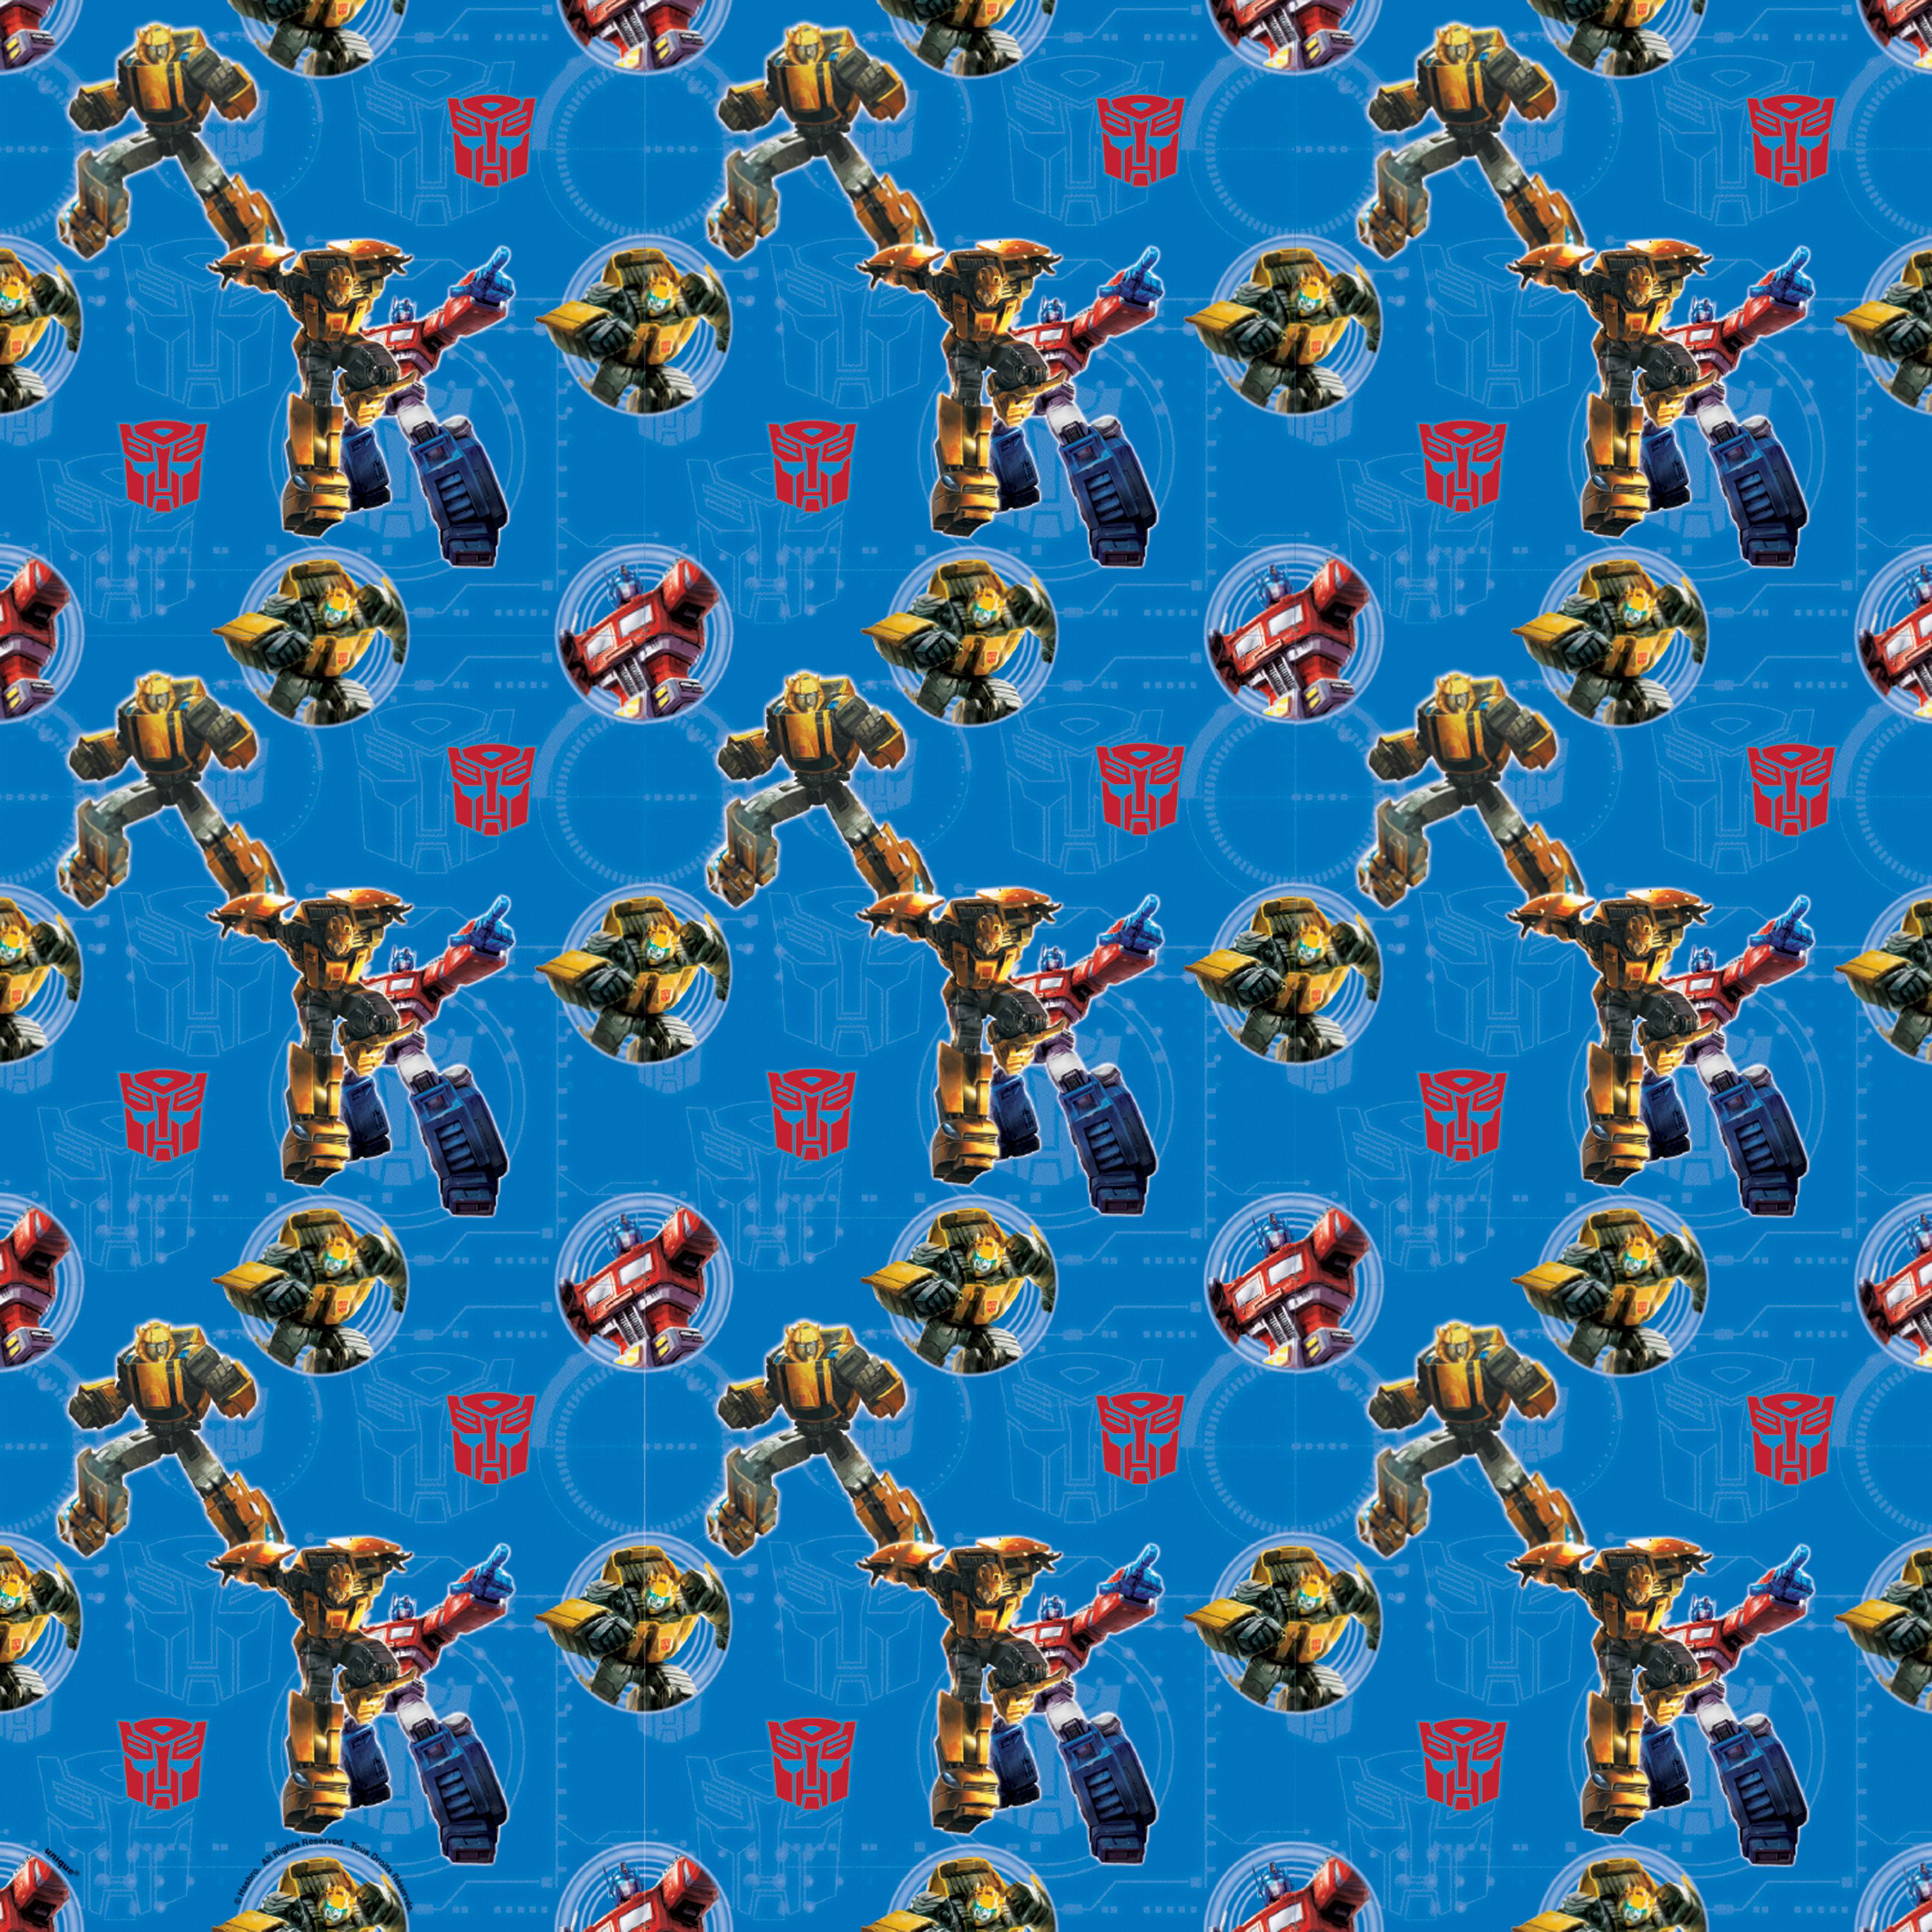 Transformers Large 70 sq ft Roll of Holiday Christmas Gift Wrapping Paper 